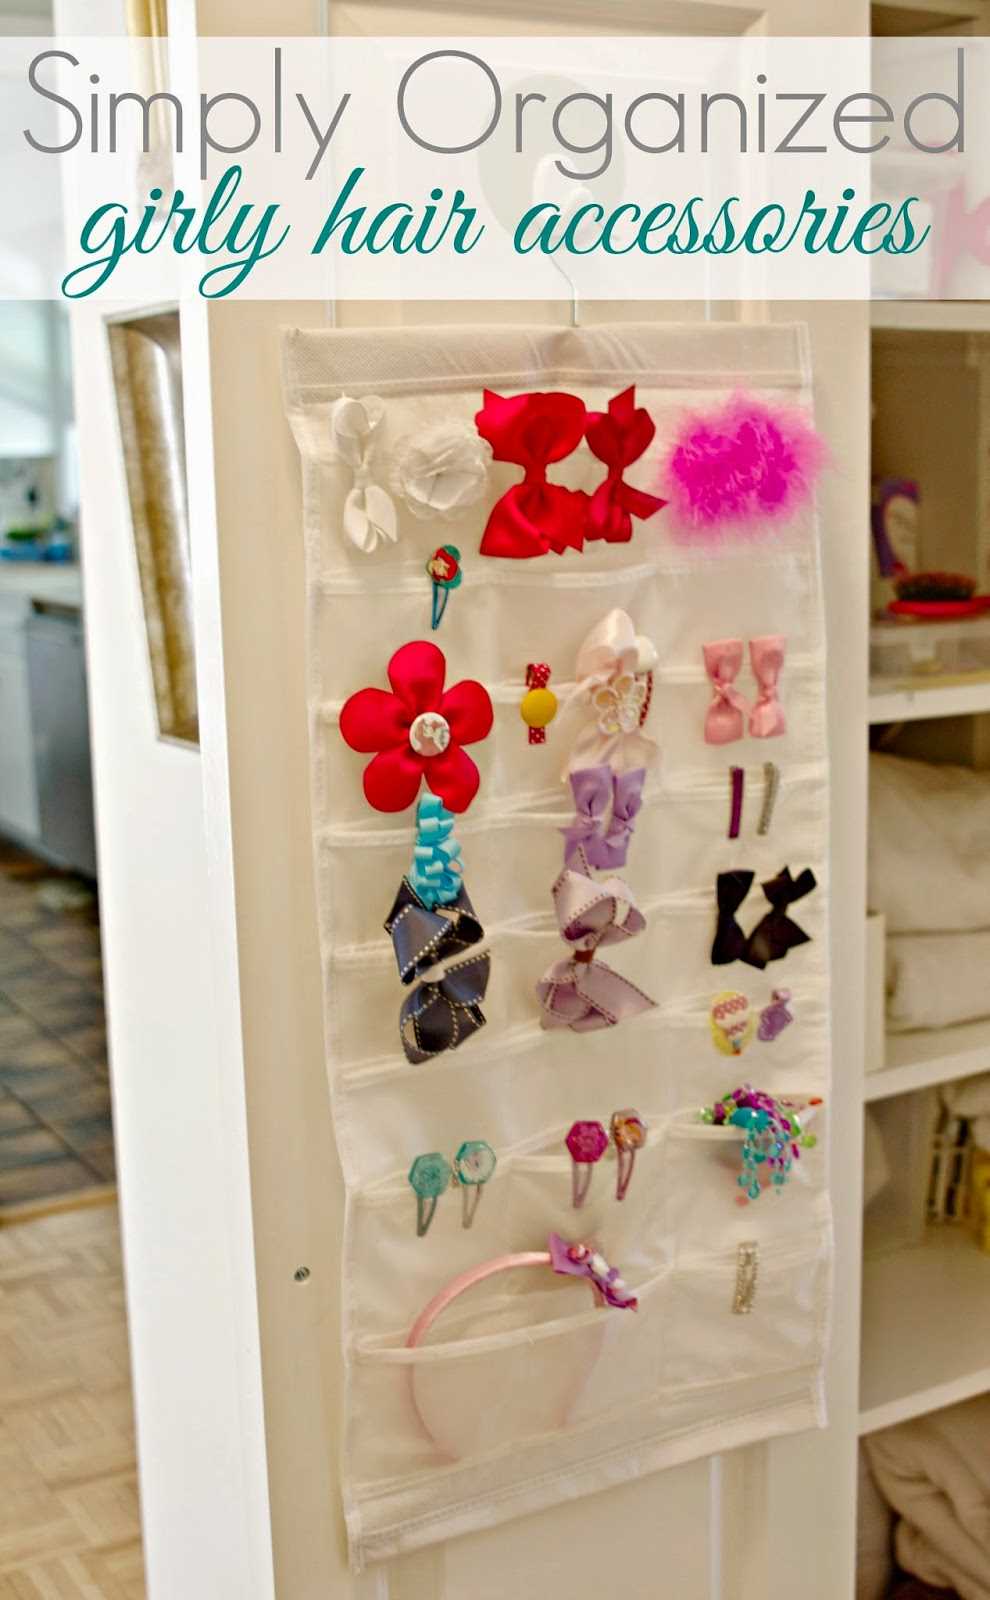 Problems with Not Having a Hair Accessory Organizer